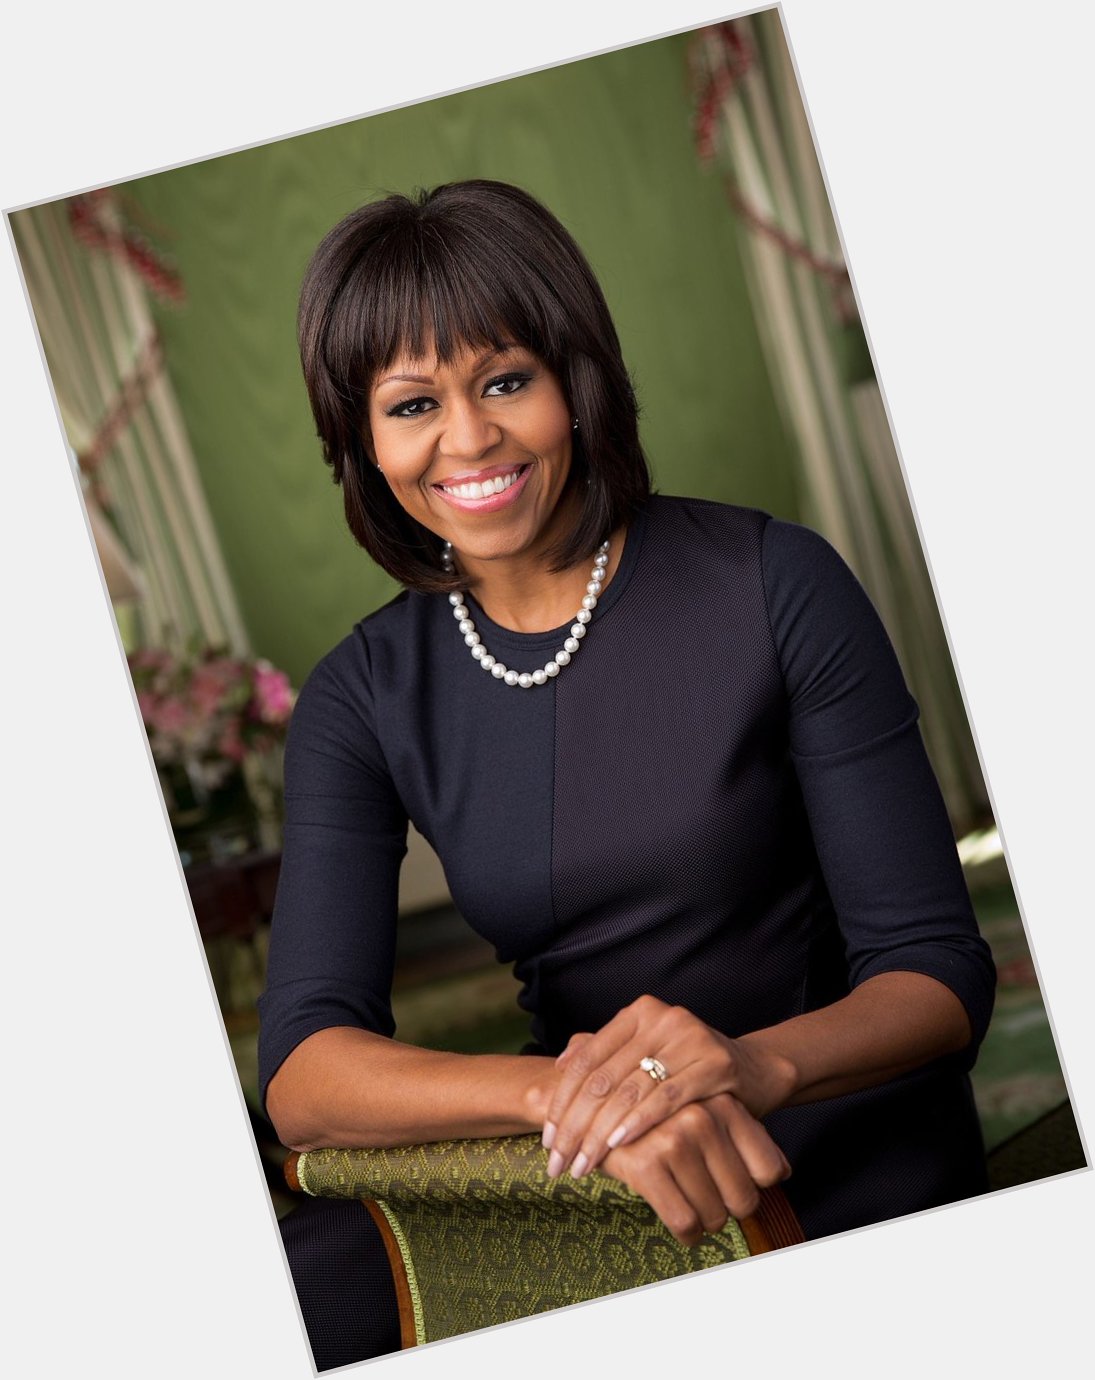 Happy Birthday, Michelle Obama with your South Carolina roots! 